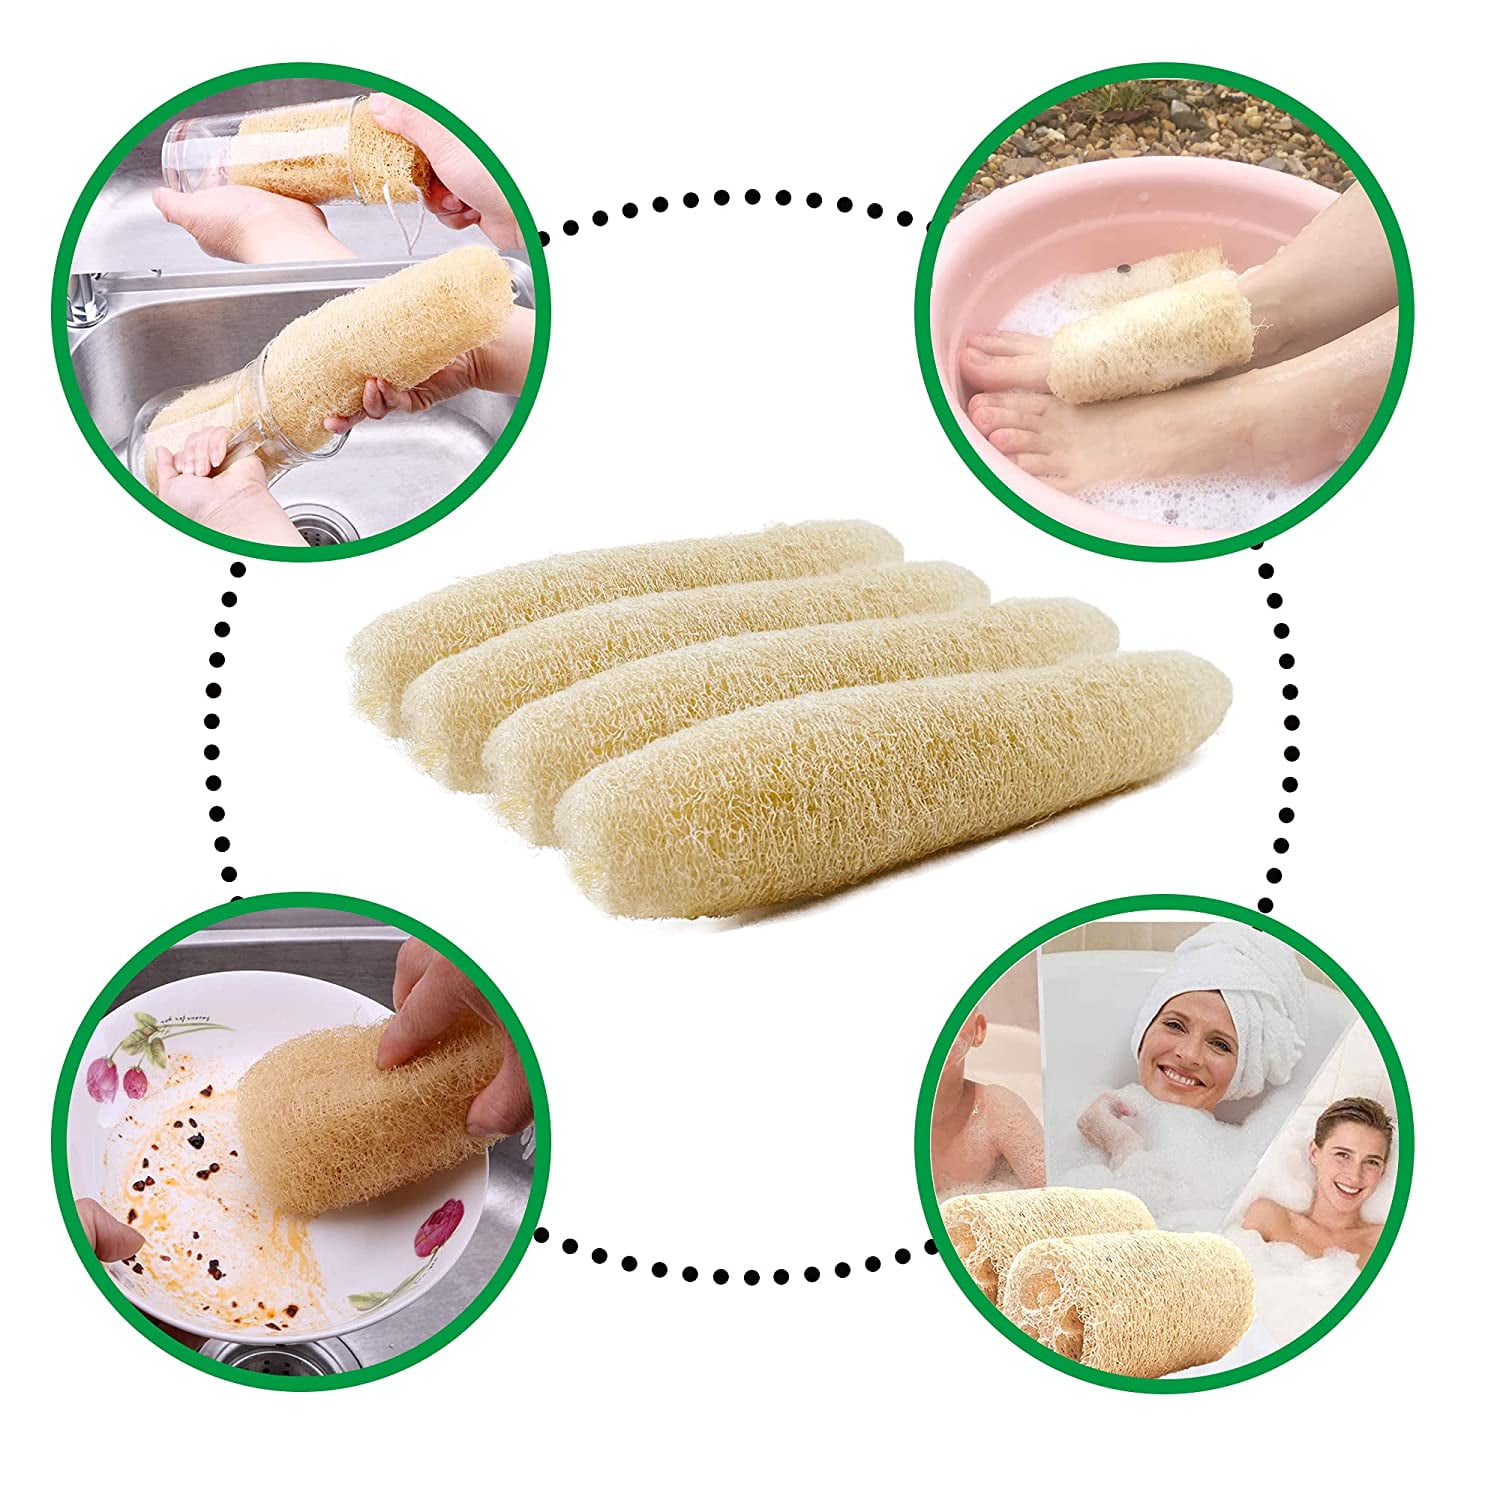 6 Essential Things You Need to Know about a Natural Loofah – NatBrands